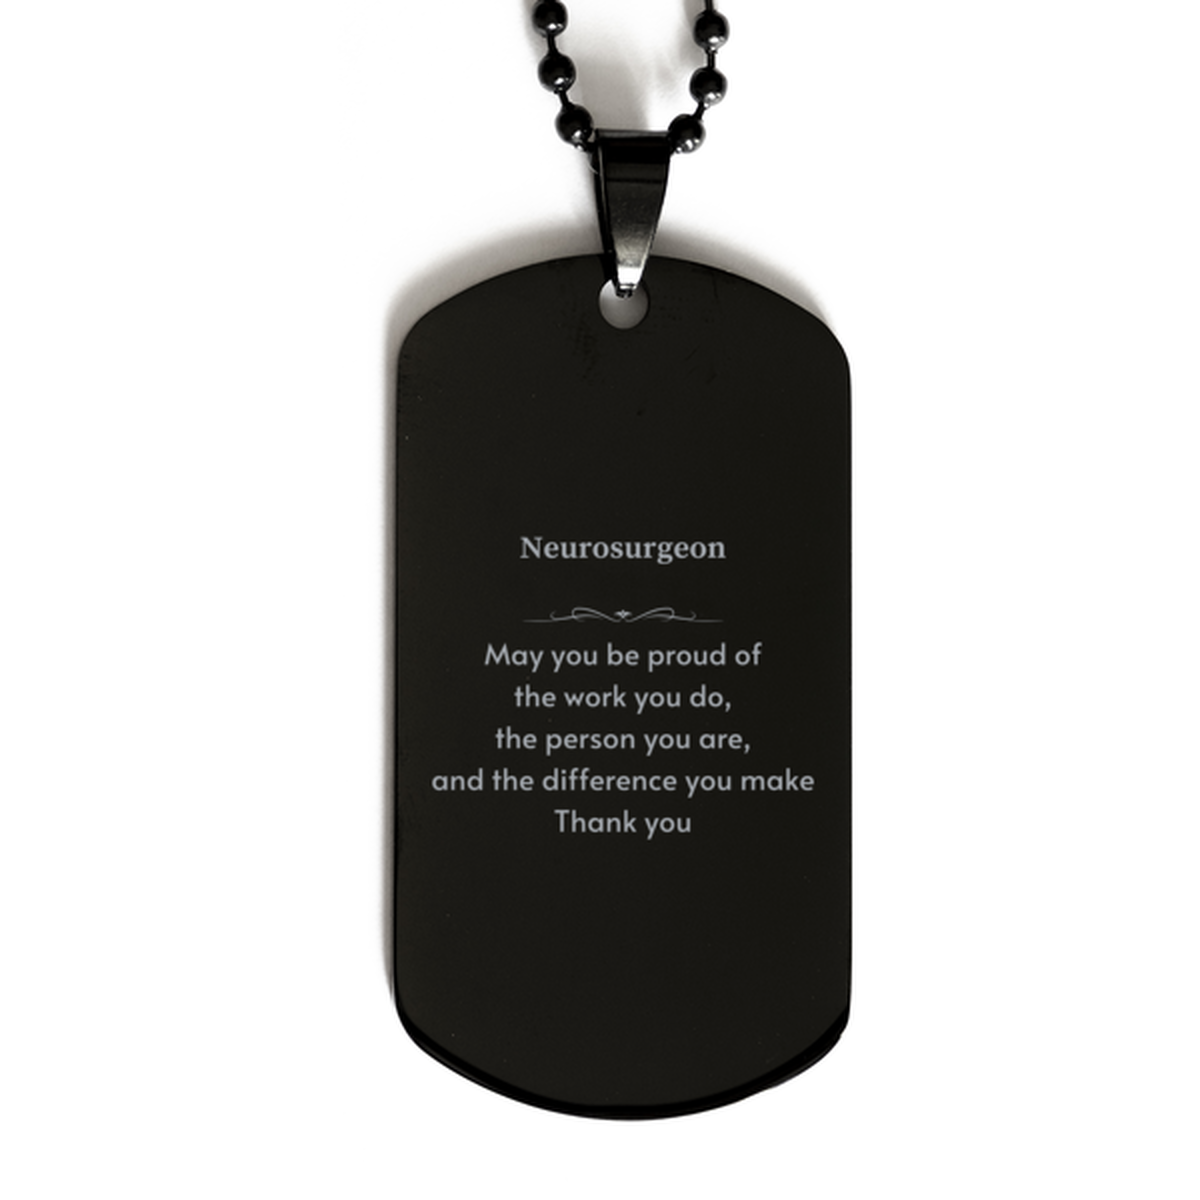 Heartwarming Black Dog Tag Retirement Coworkers Gifts for Neurosurgeon, Neurosurgeon May You be proud of the work you do, the person you are Gifts for Boss Men Women Friends